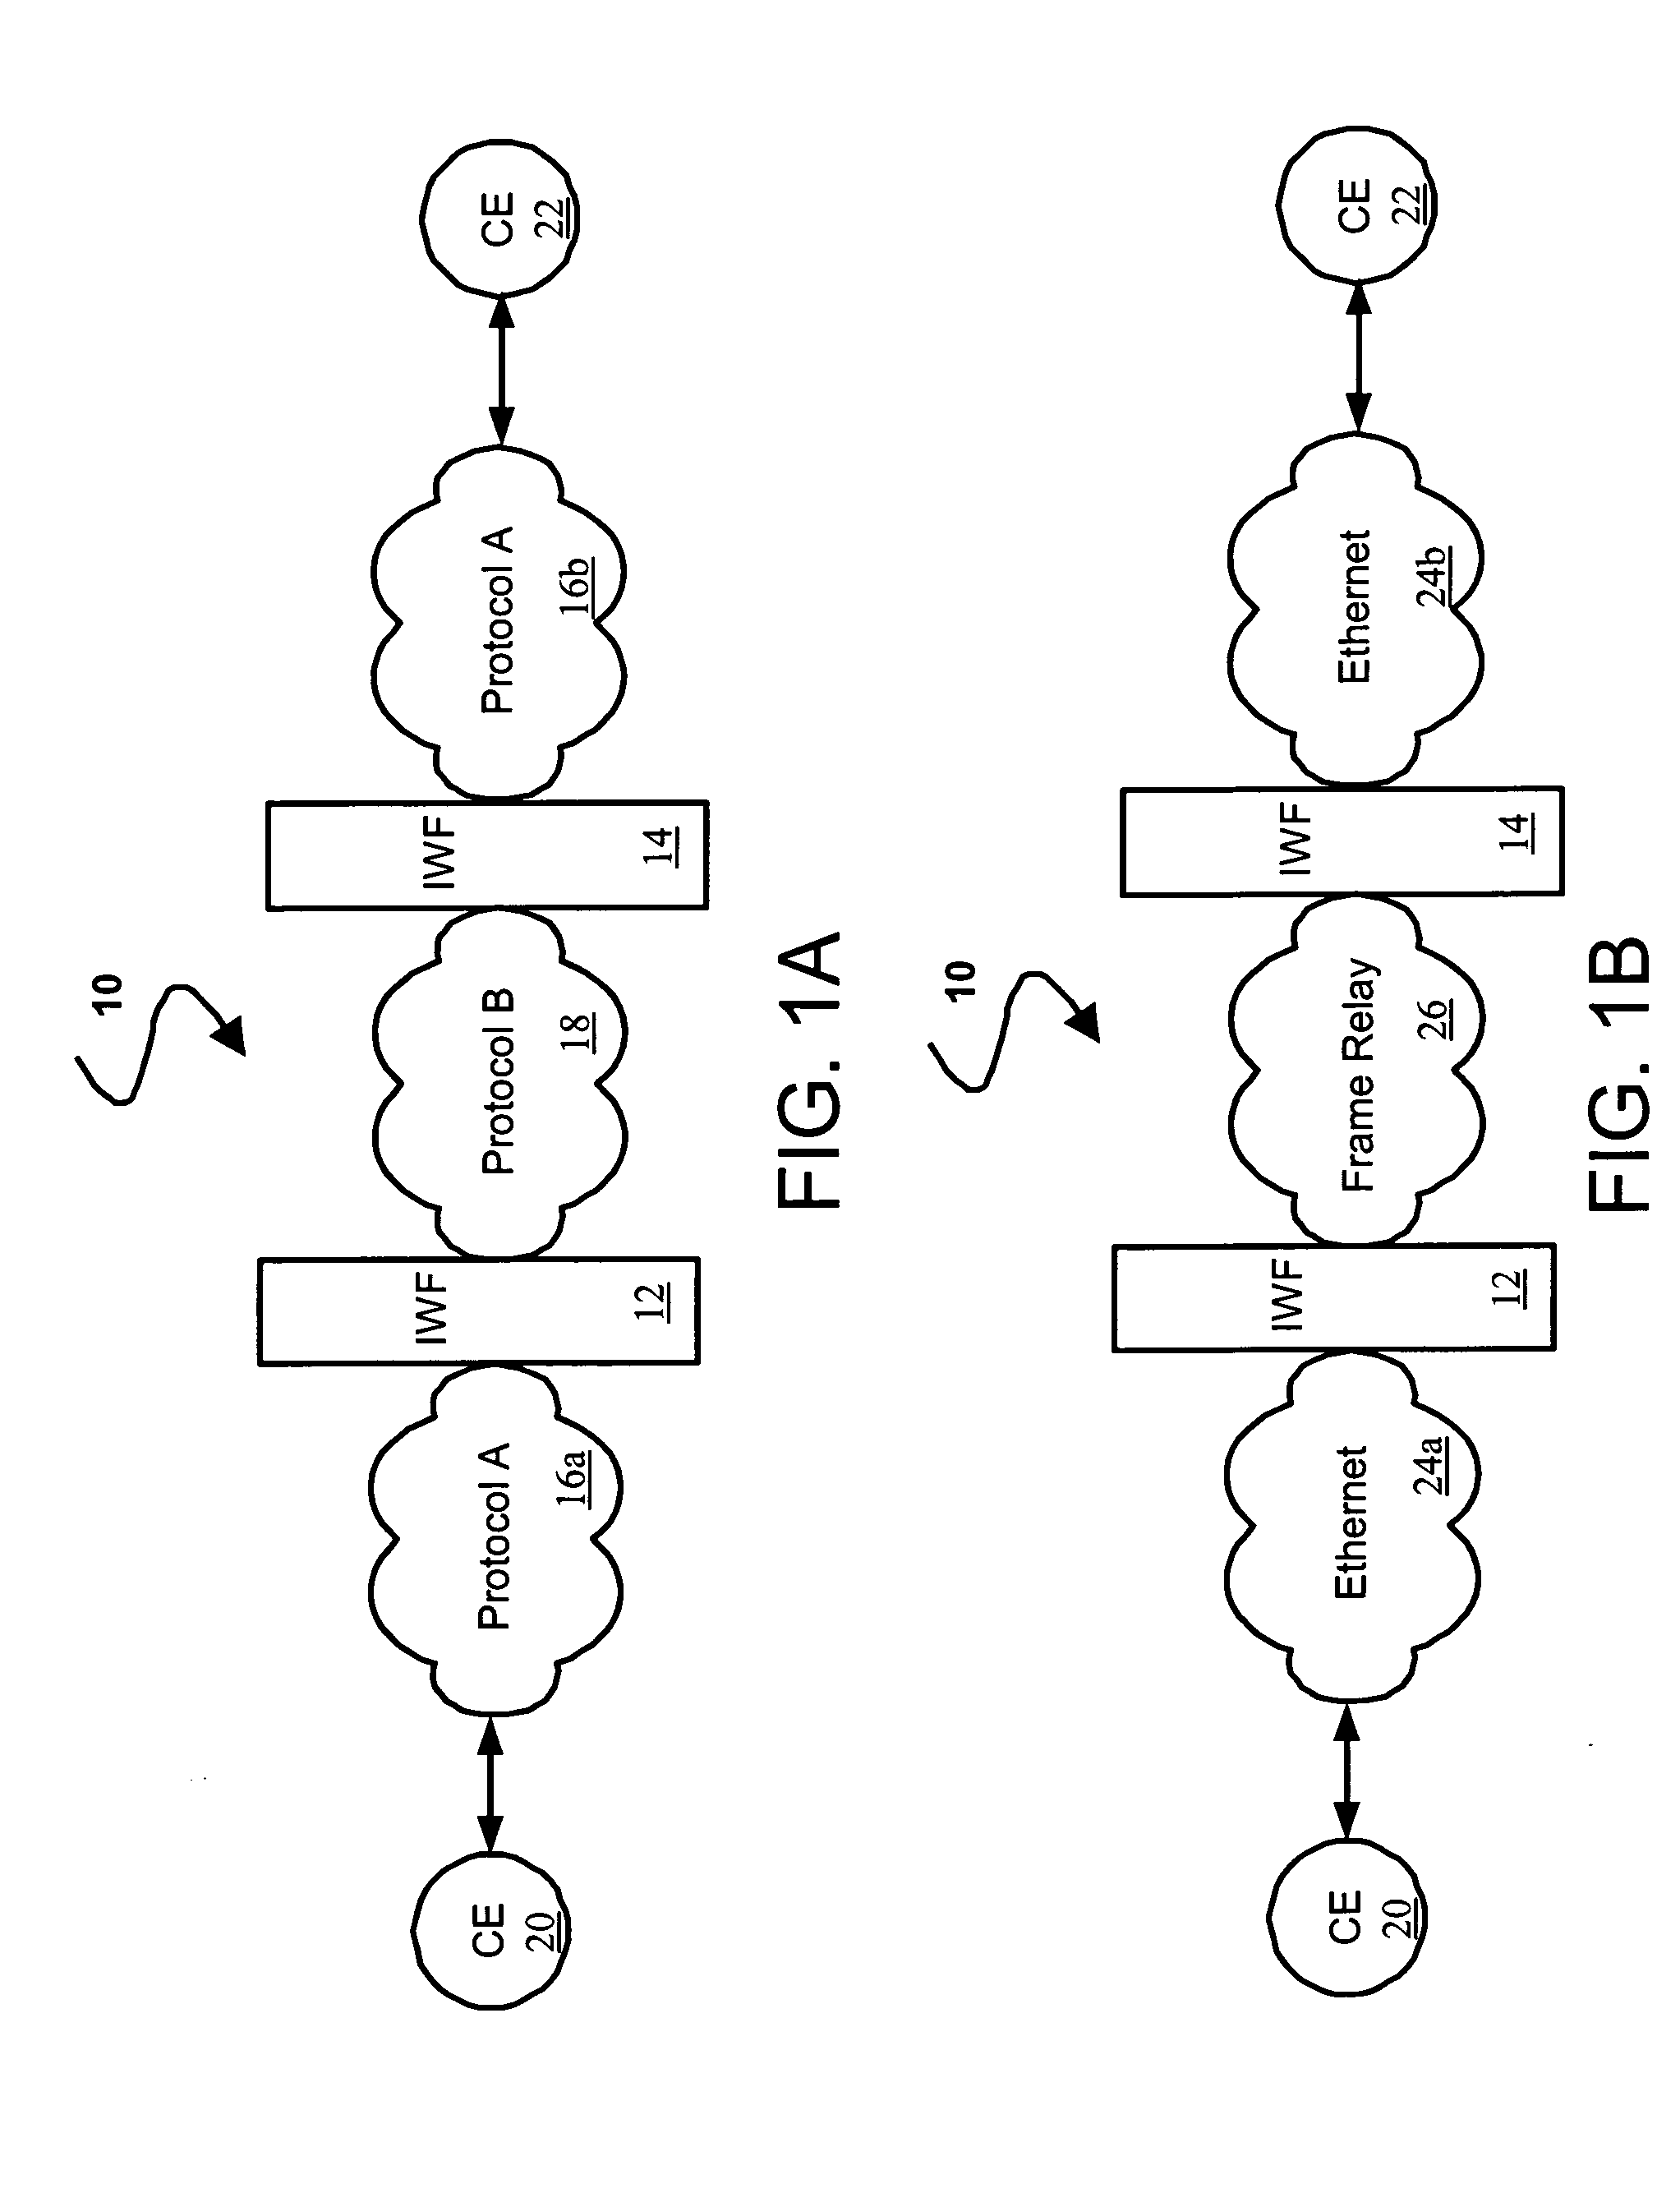 Method and system for ethernet and frame relay network interworking